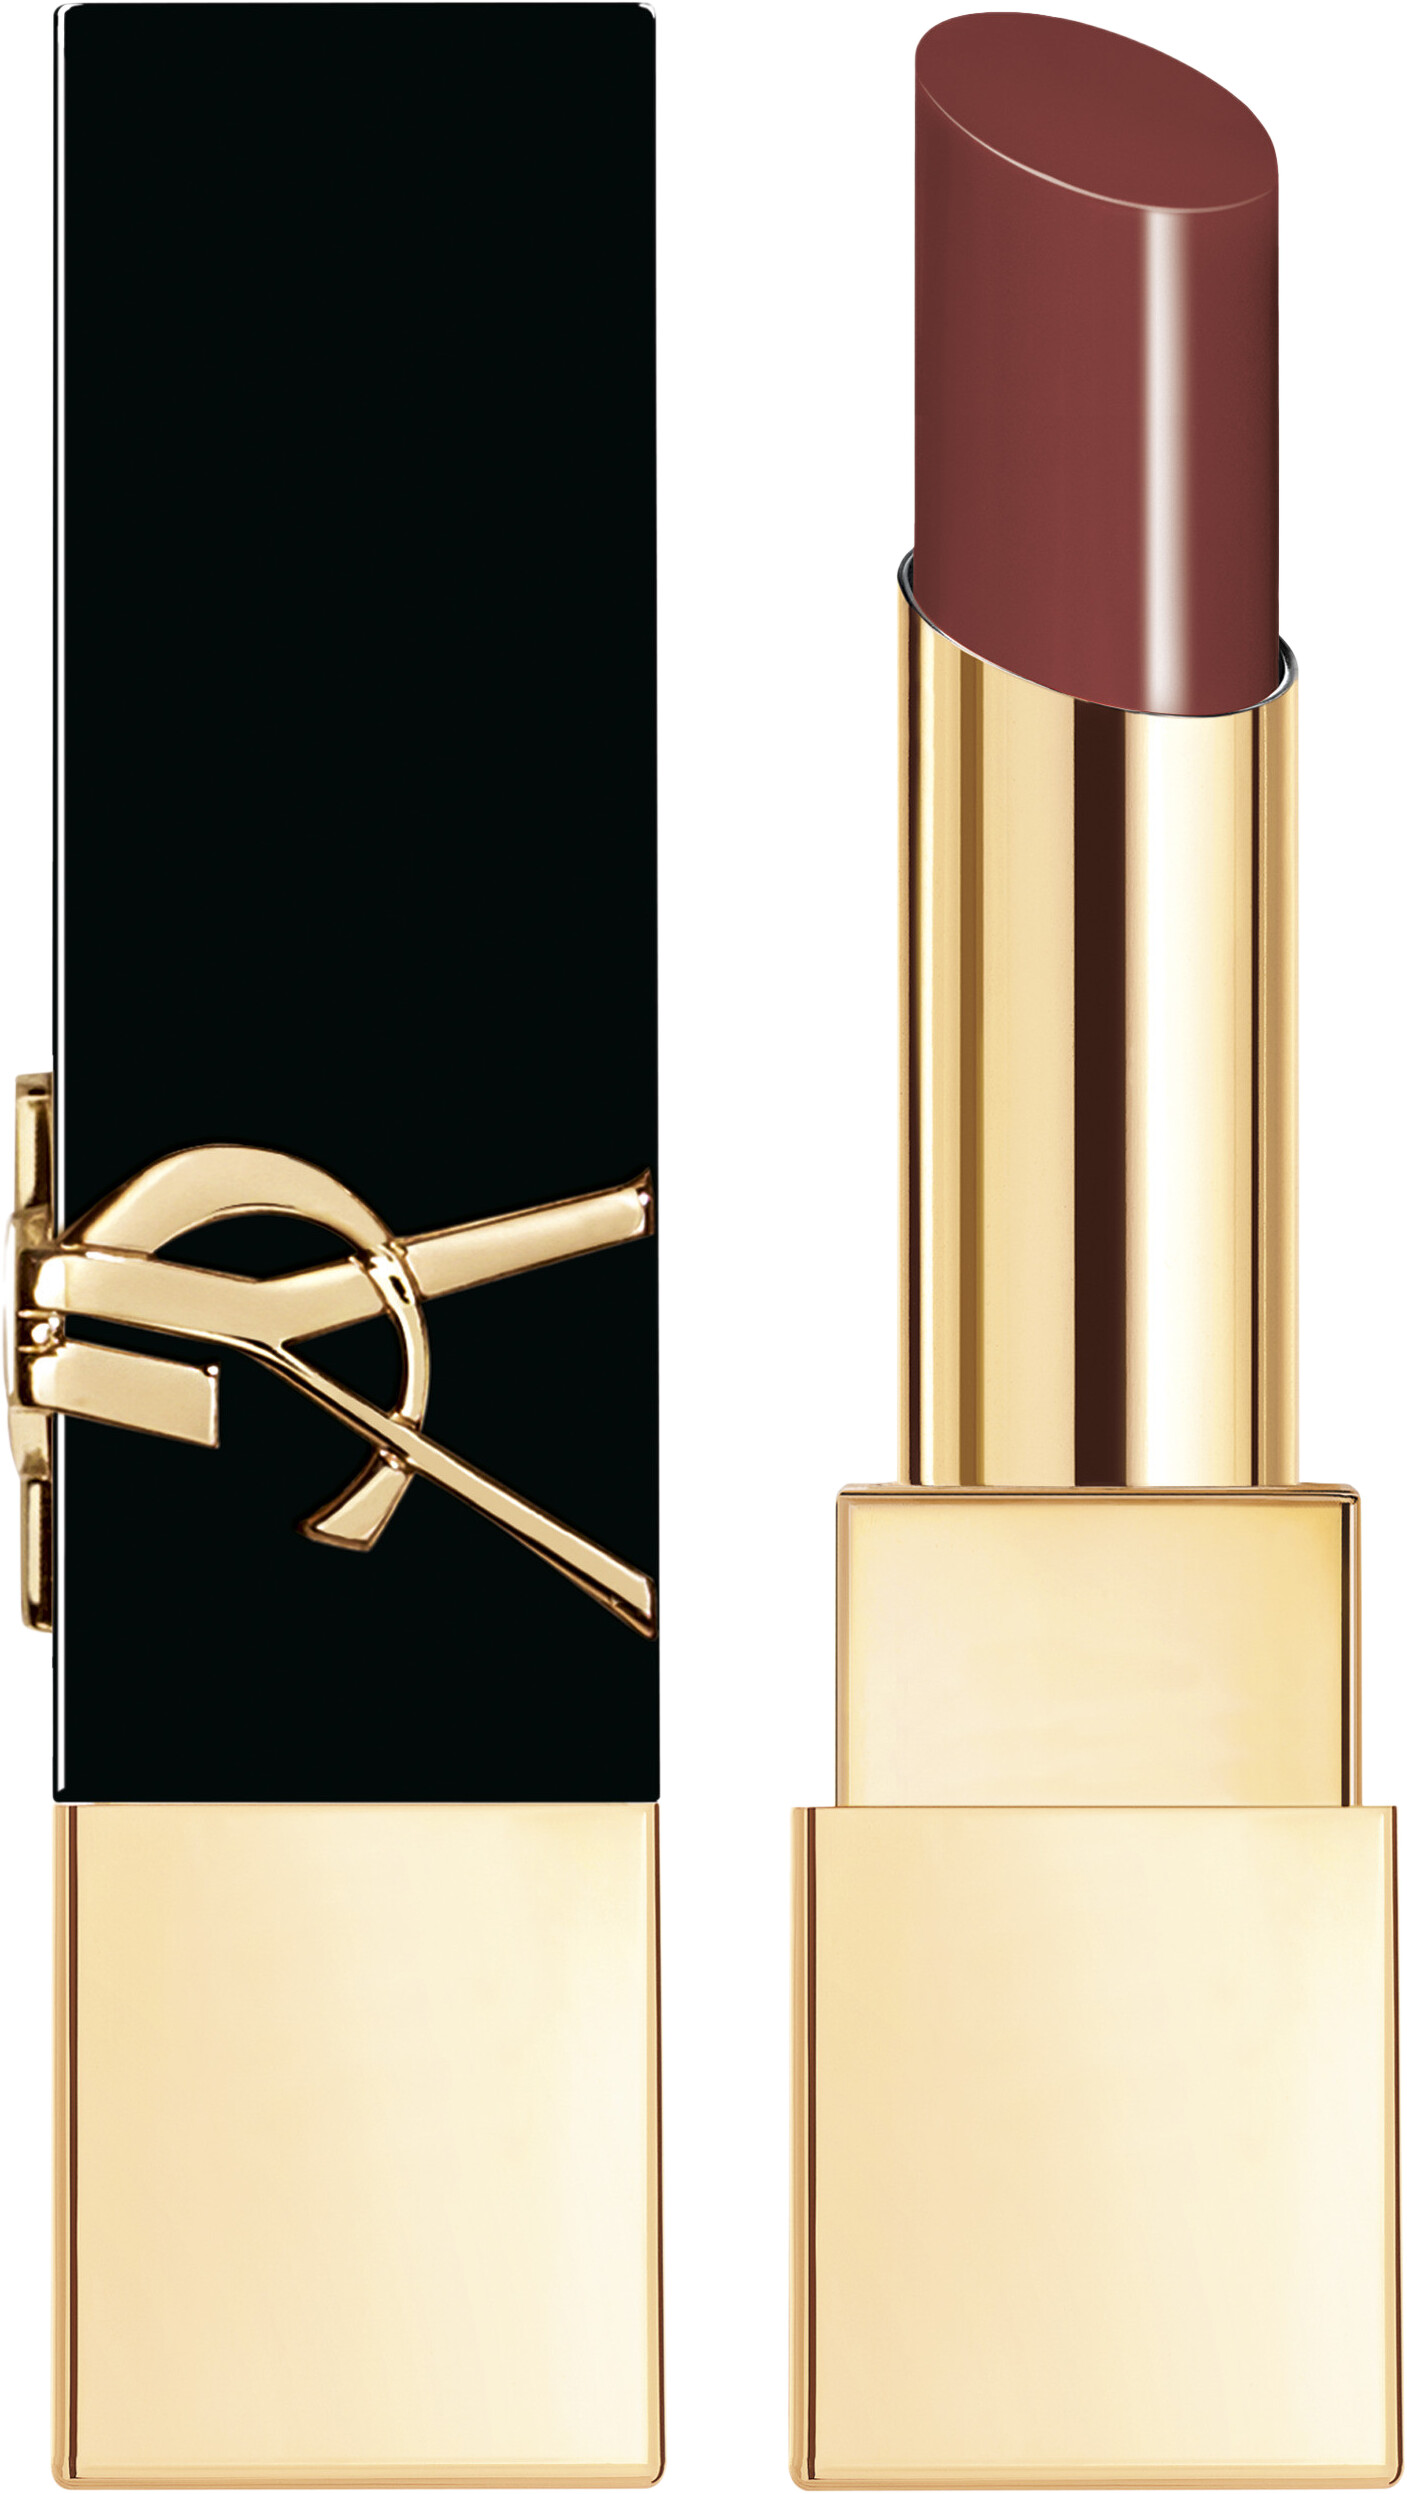 Yves Saint Laurent Rouge Pur Couture The Bold Lipstick 3g 14 - Nude Tribute